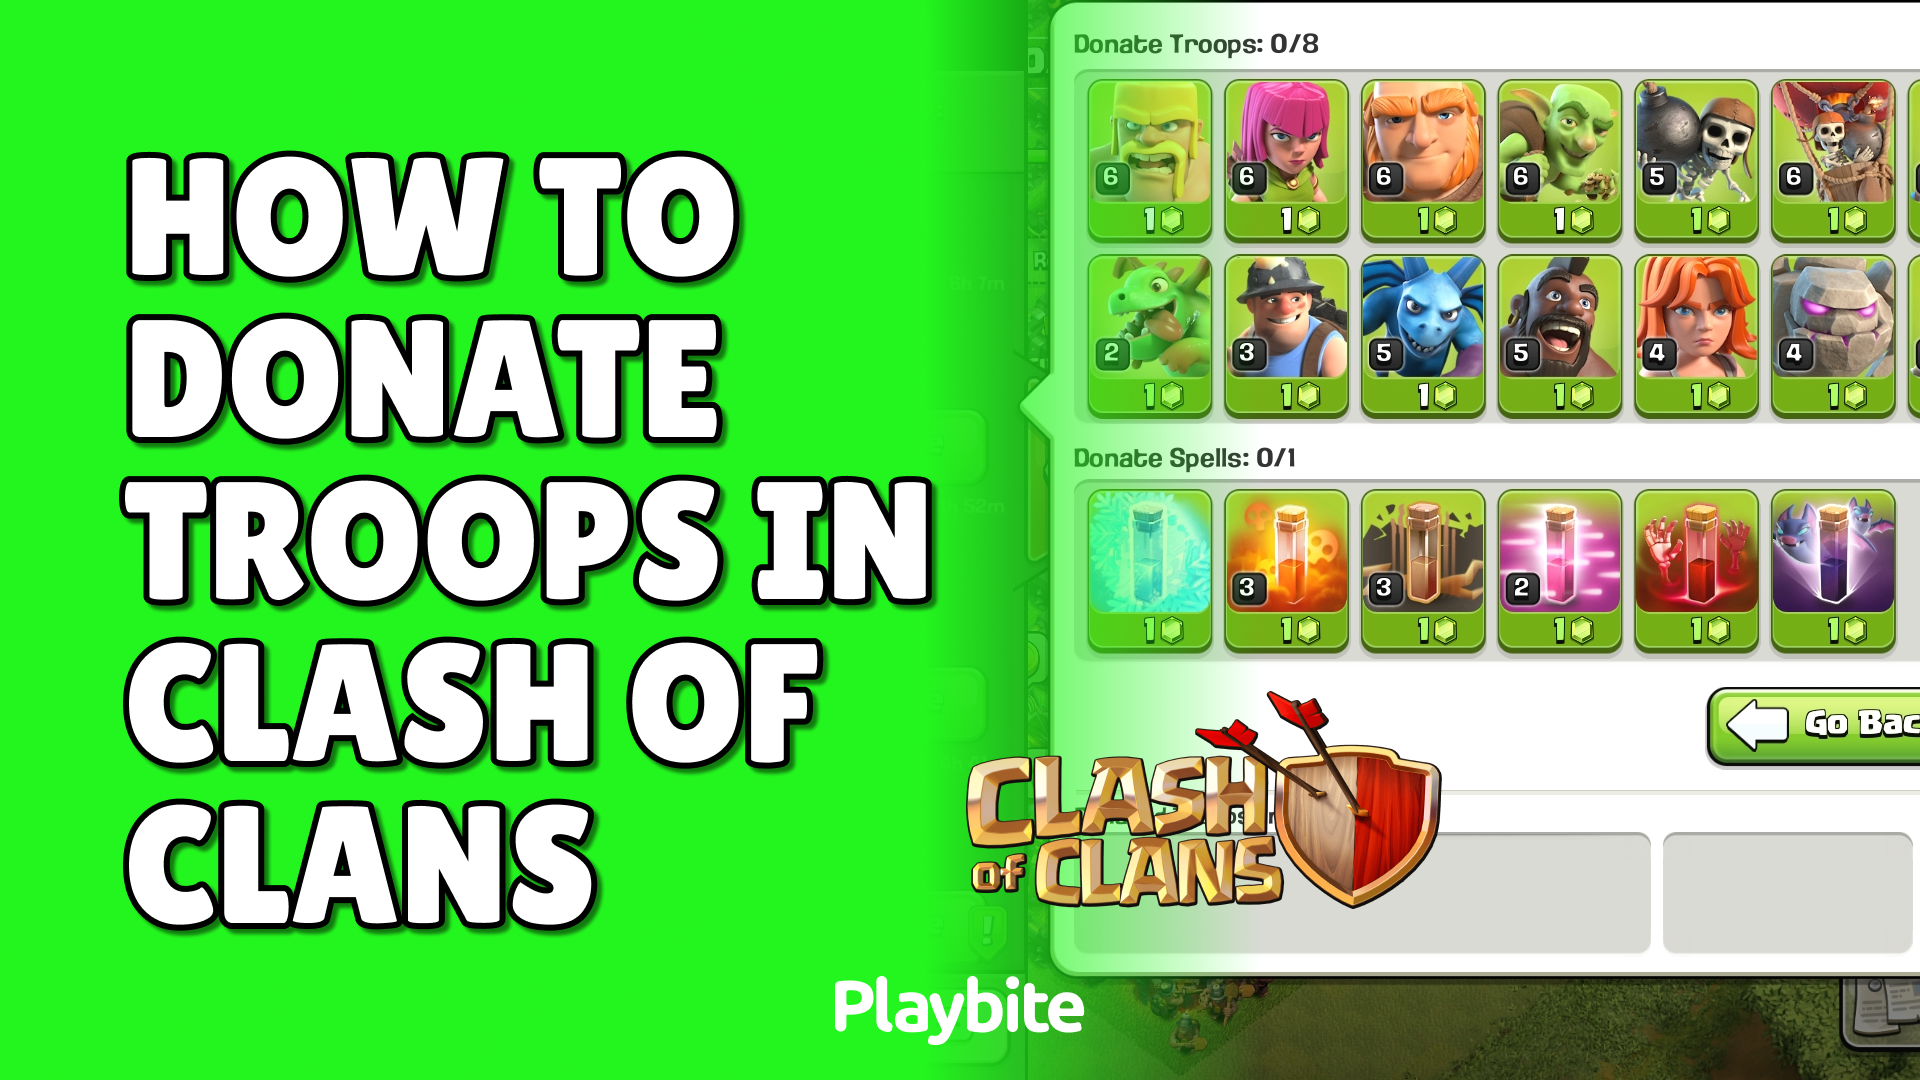 How To Donate Troops In Clash Of Clans